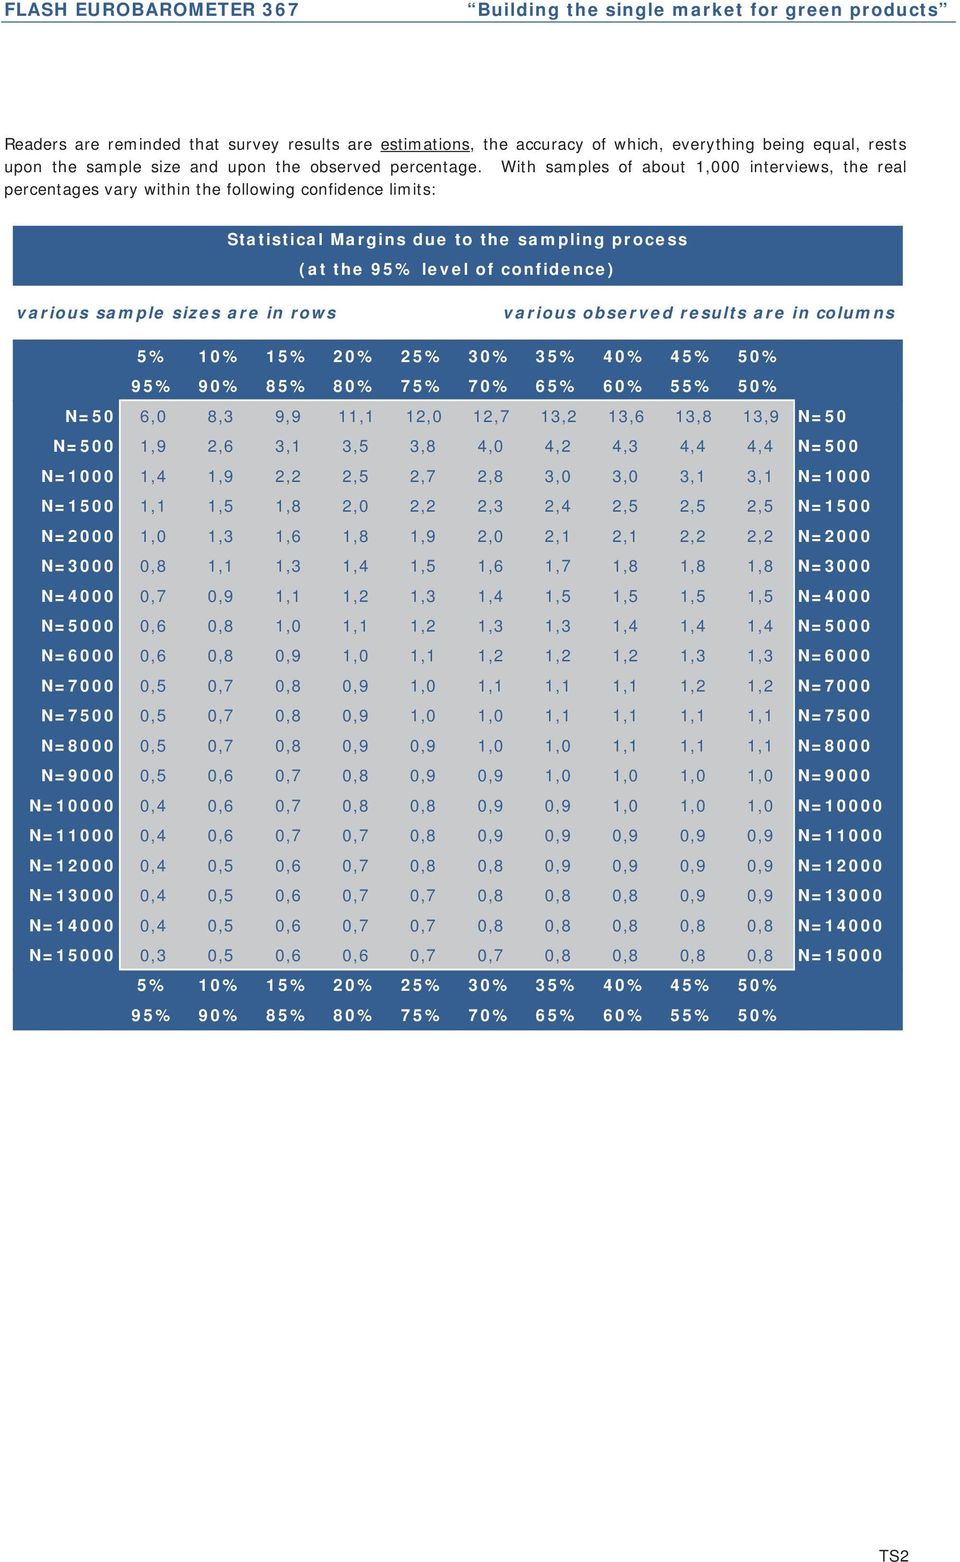 sample sizes are in rows various observed results are in columns 5% 10% 15% 20% 25% 30% 35% 40% 45% 50% 95% 90% 85% 80% 75% 70% 65% 60% 55% 50% N=50 6,0 8,3 9,9 11,1 12,0 12,7 13,2 13,6 13,8 13,9